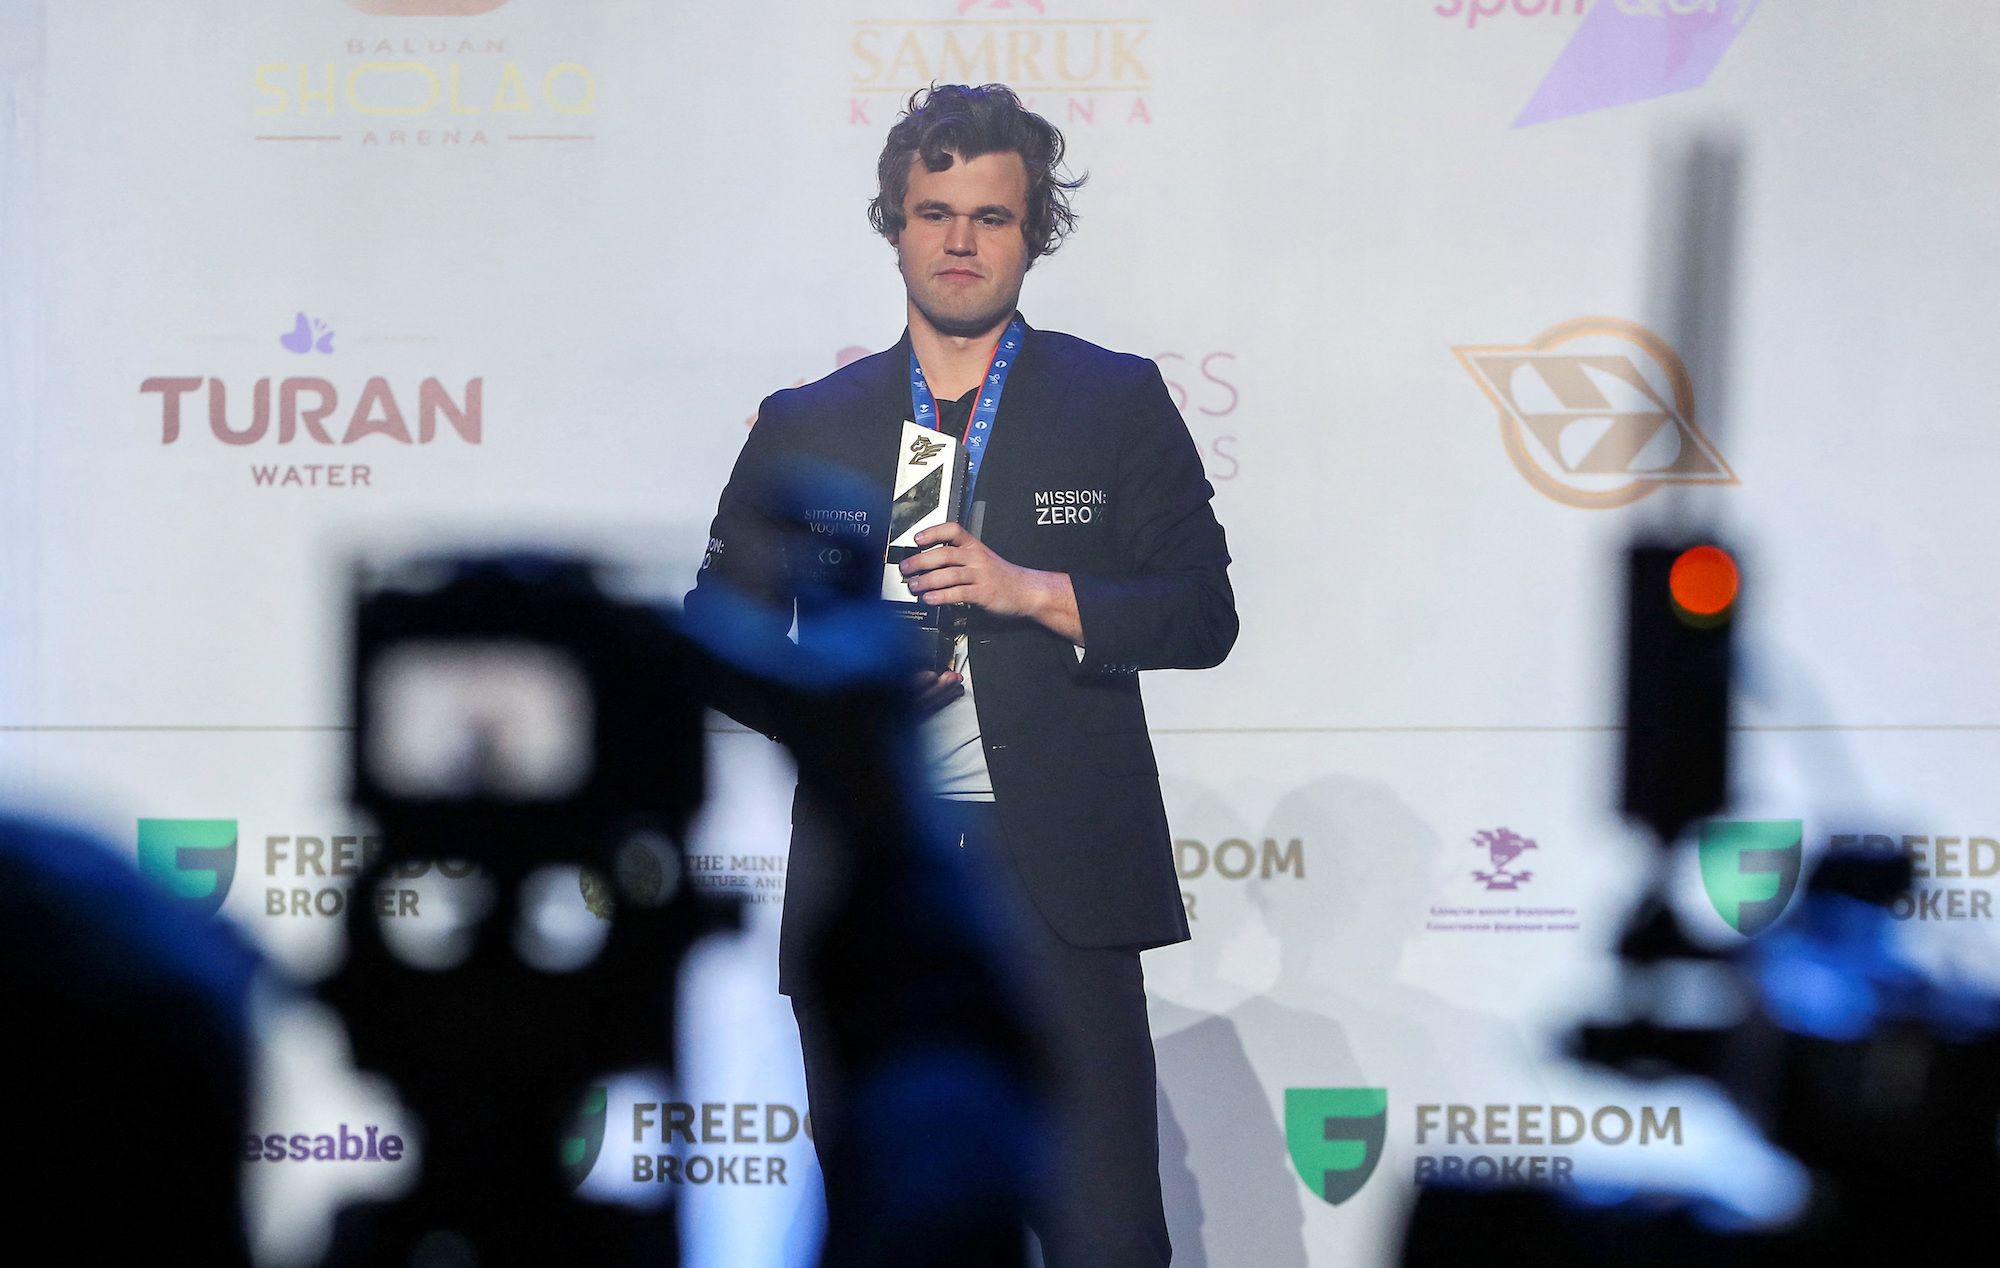 ▷ Discover How Magnus Carlsen Became the World Champion!